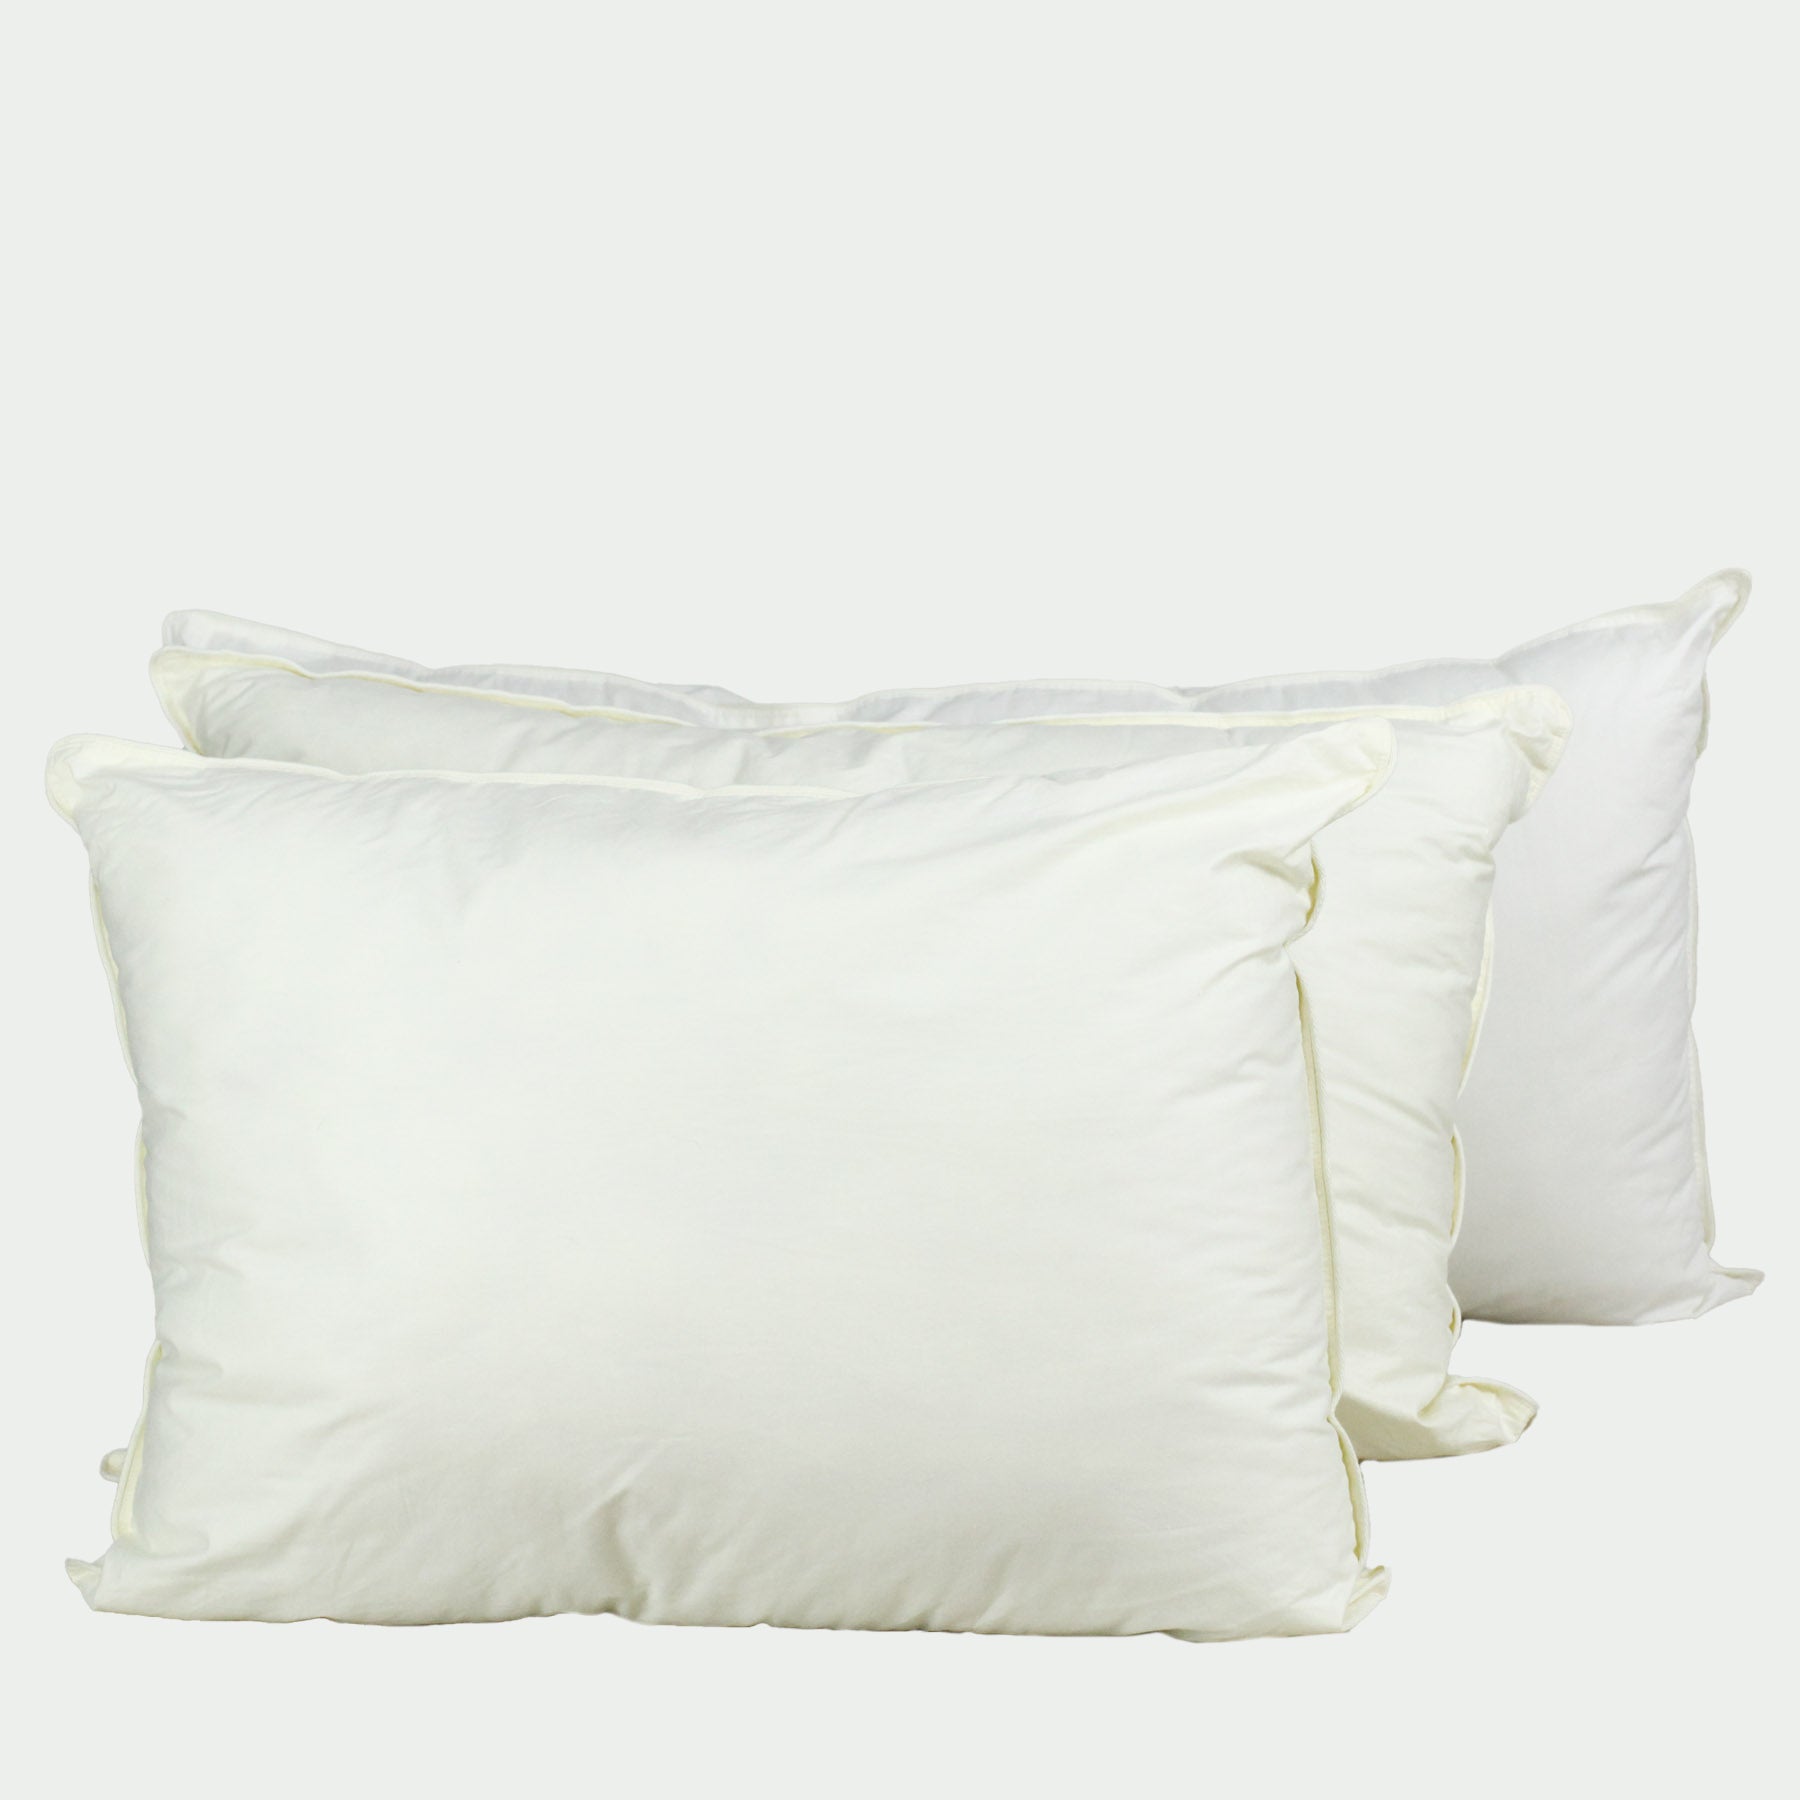 Luxurious Euro Pillow Filler by [Brand Name] - Hypoallergenic 6D